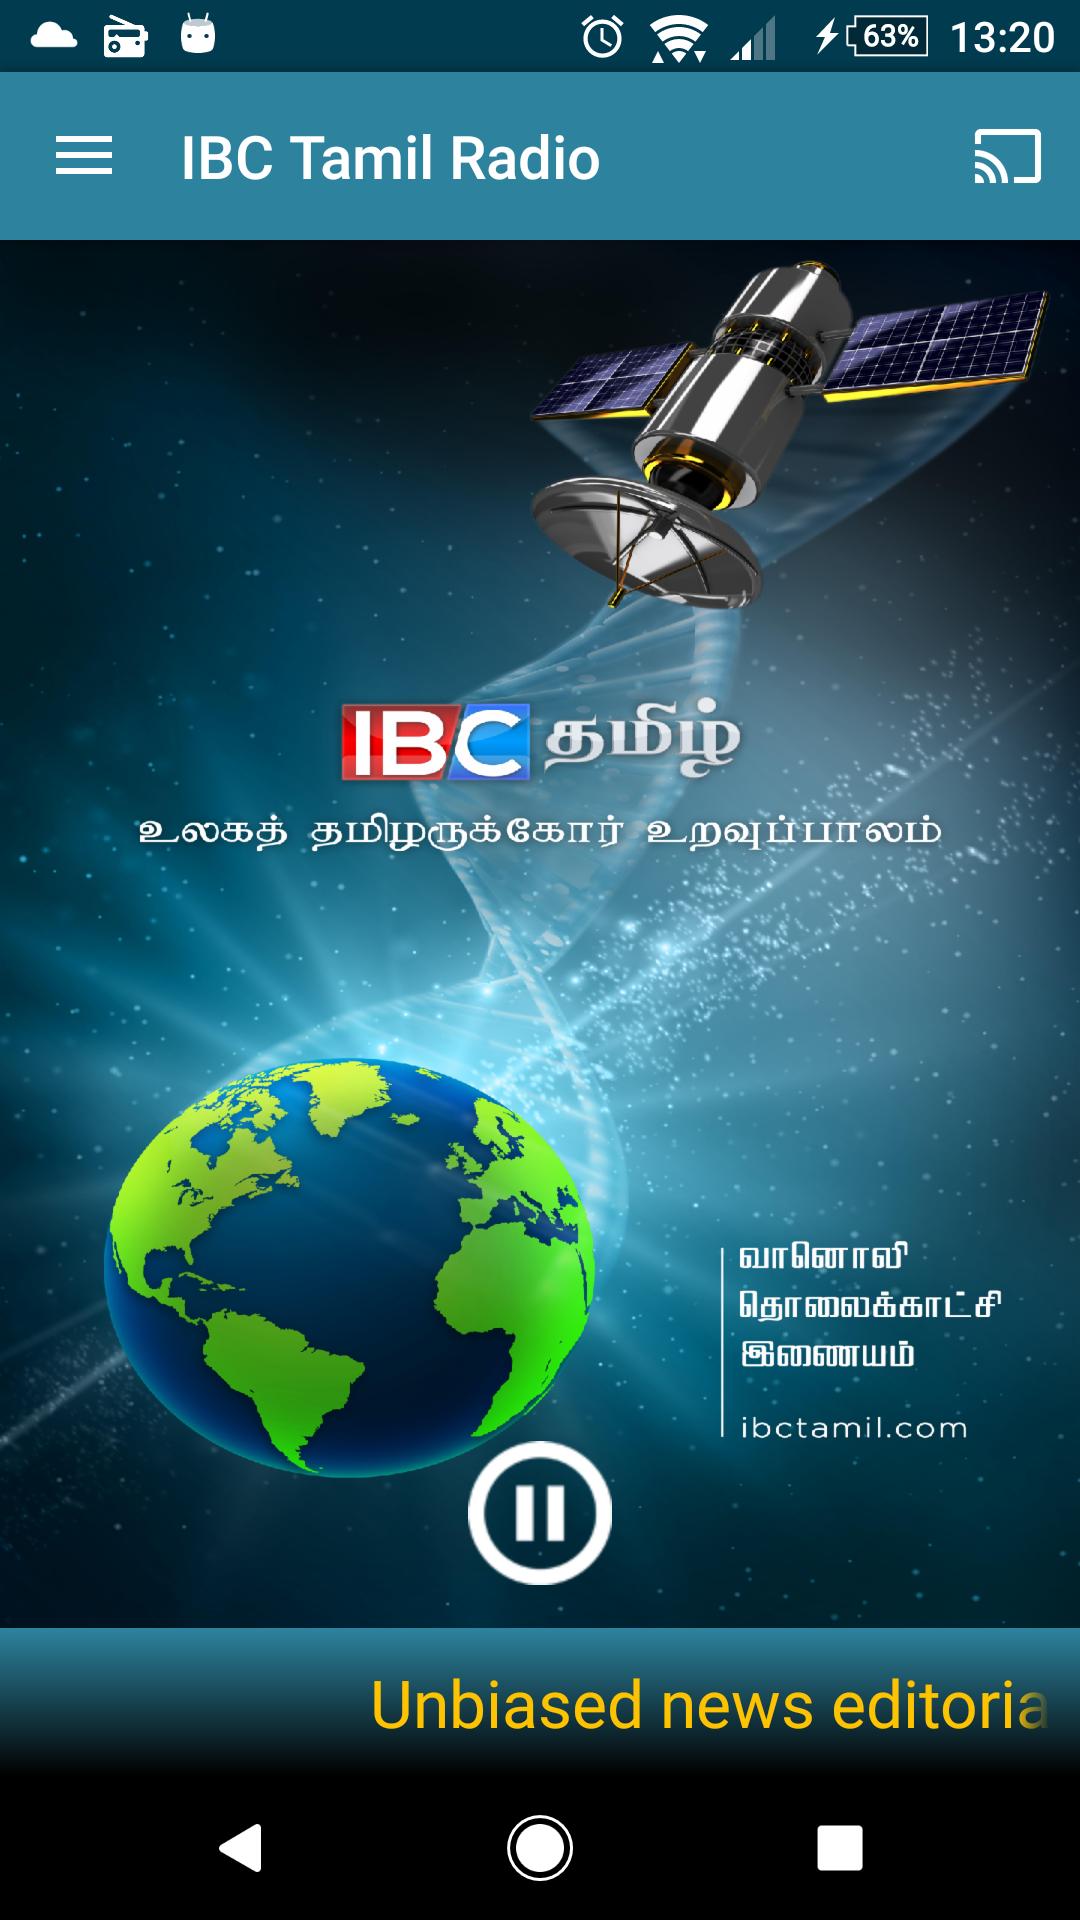 IBC Tamil Radio for Android - APK Download